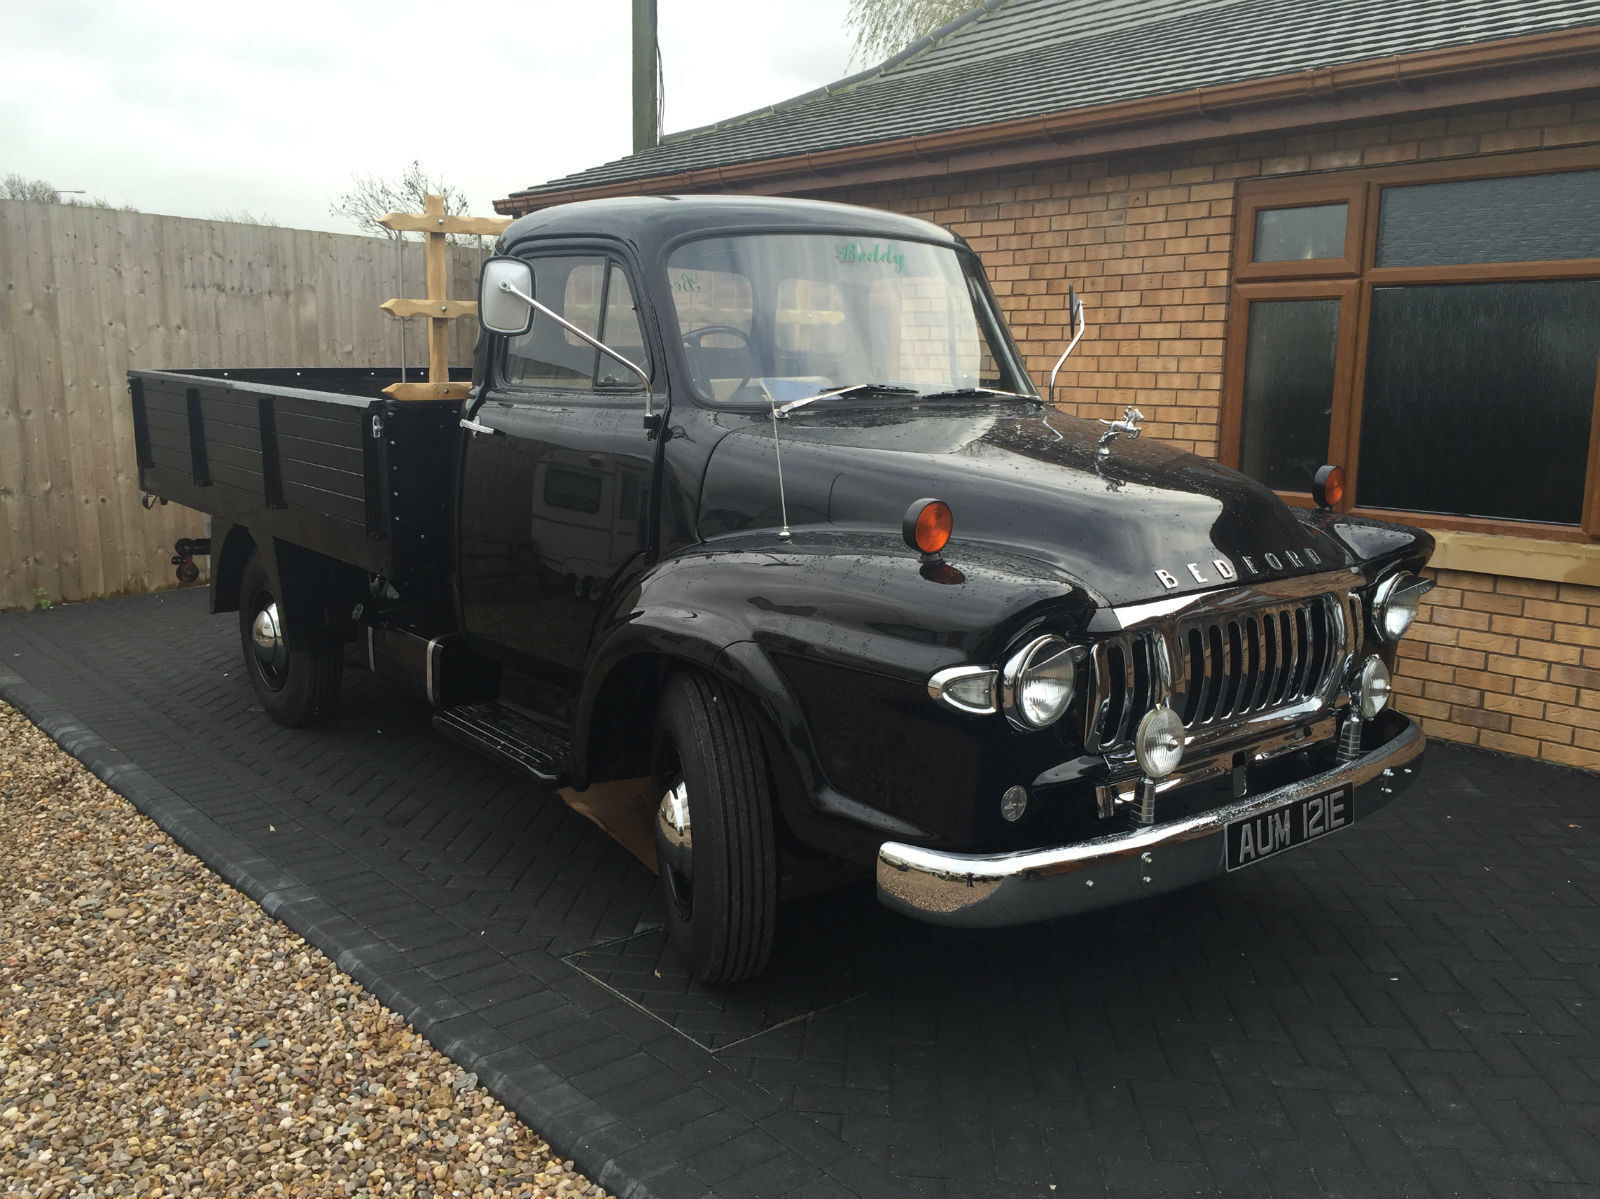 Bedford Classic Cars for sale | eBay